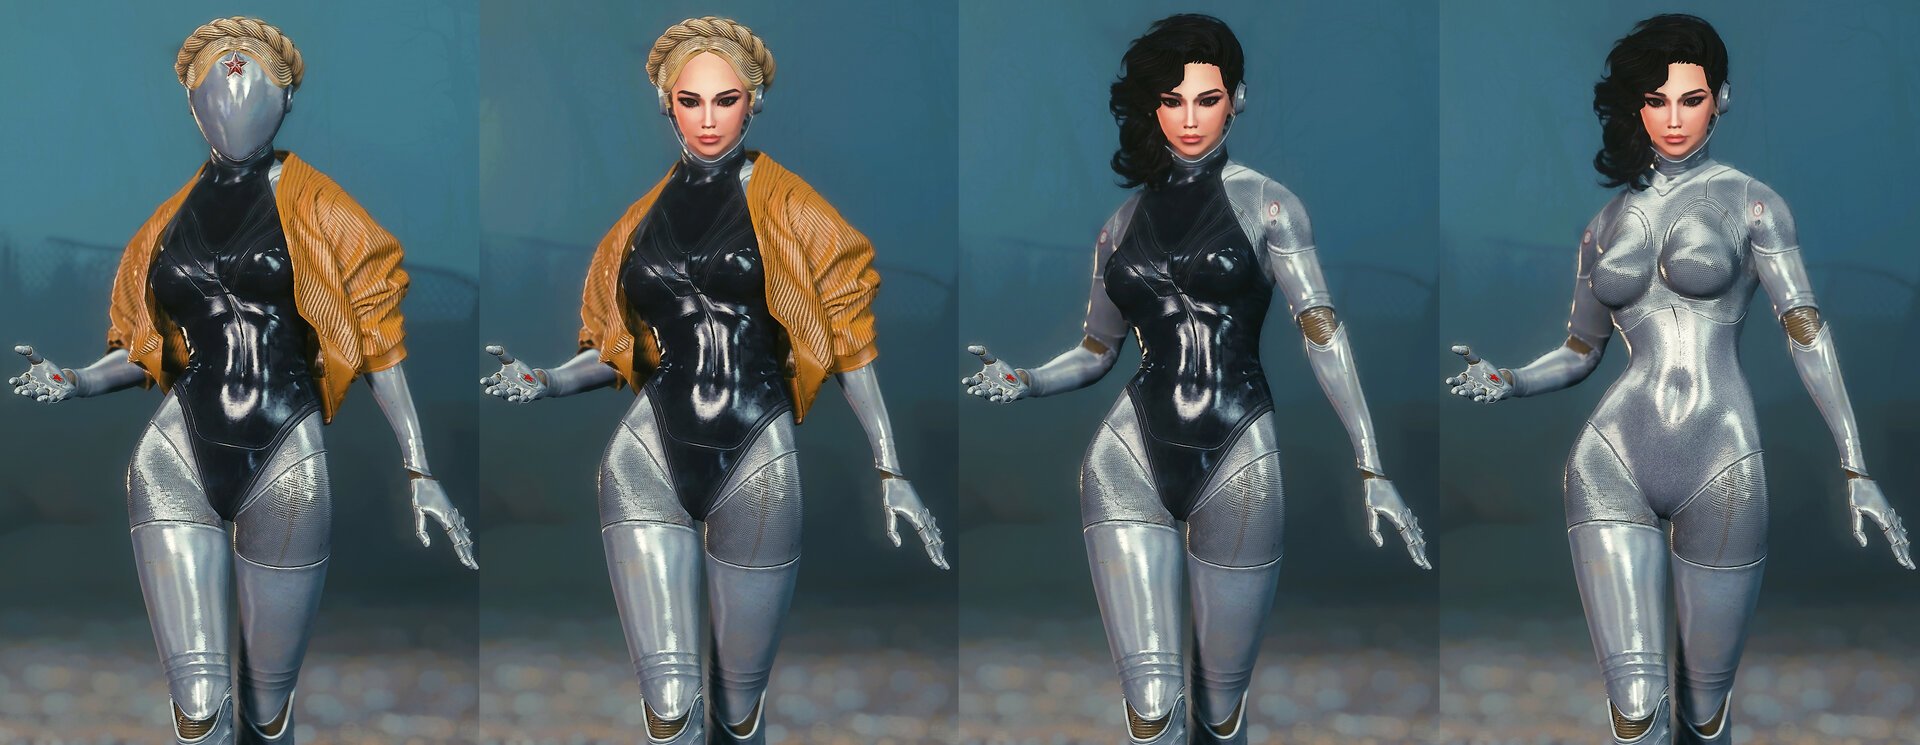 Vtaw Workshop Fallout Clothing Armor Mods Page Fallout Adult Mods LoversLab